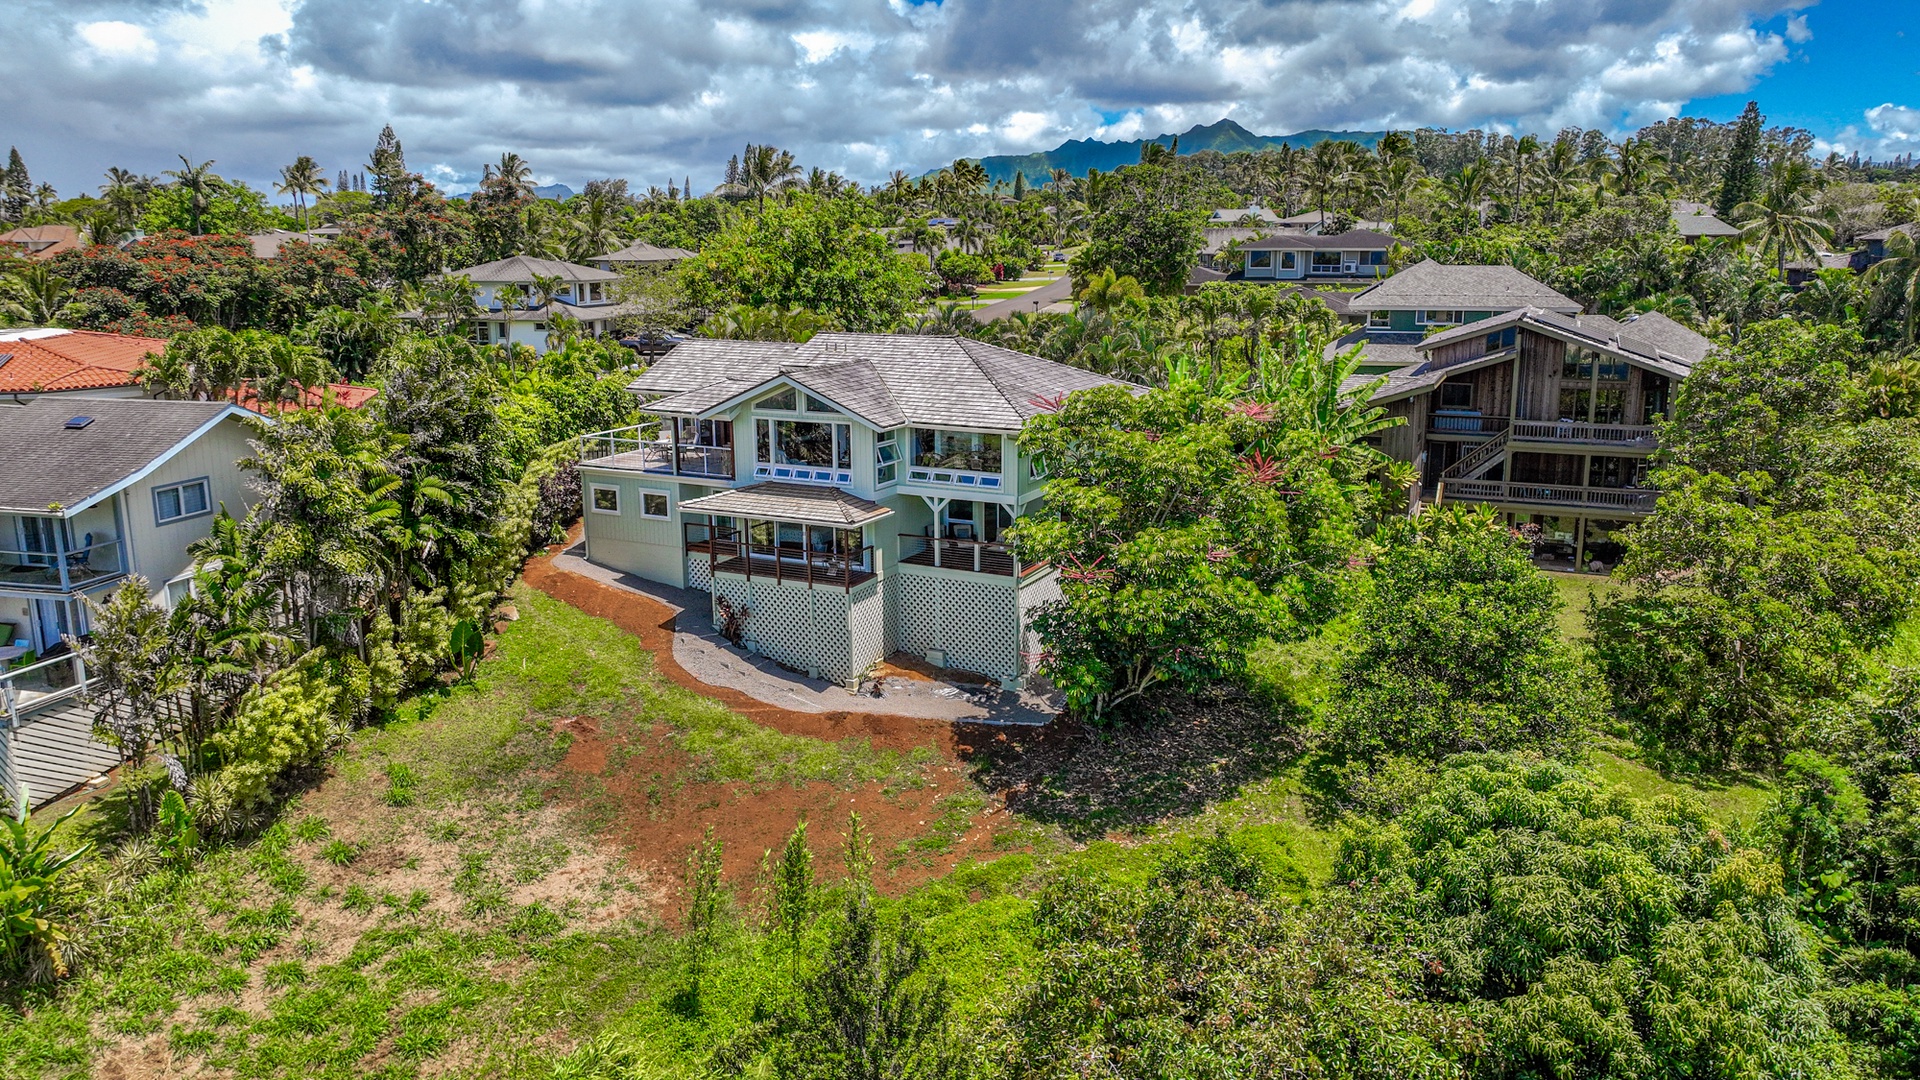 Princeville Vacation Rentals, Wai Lani - Aerial shot of the home